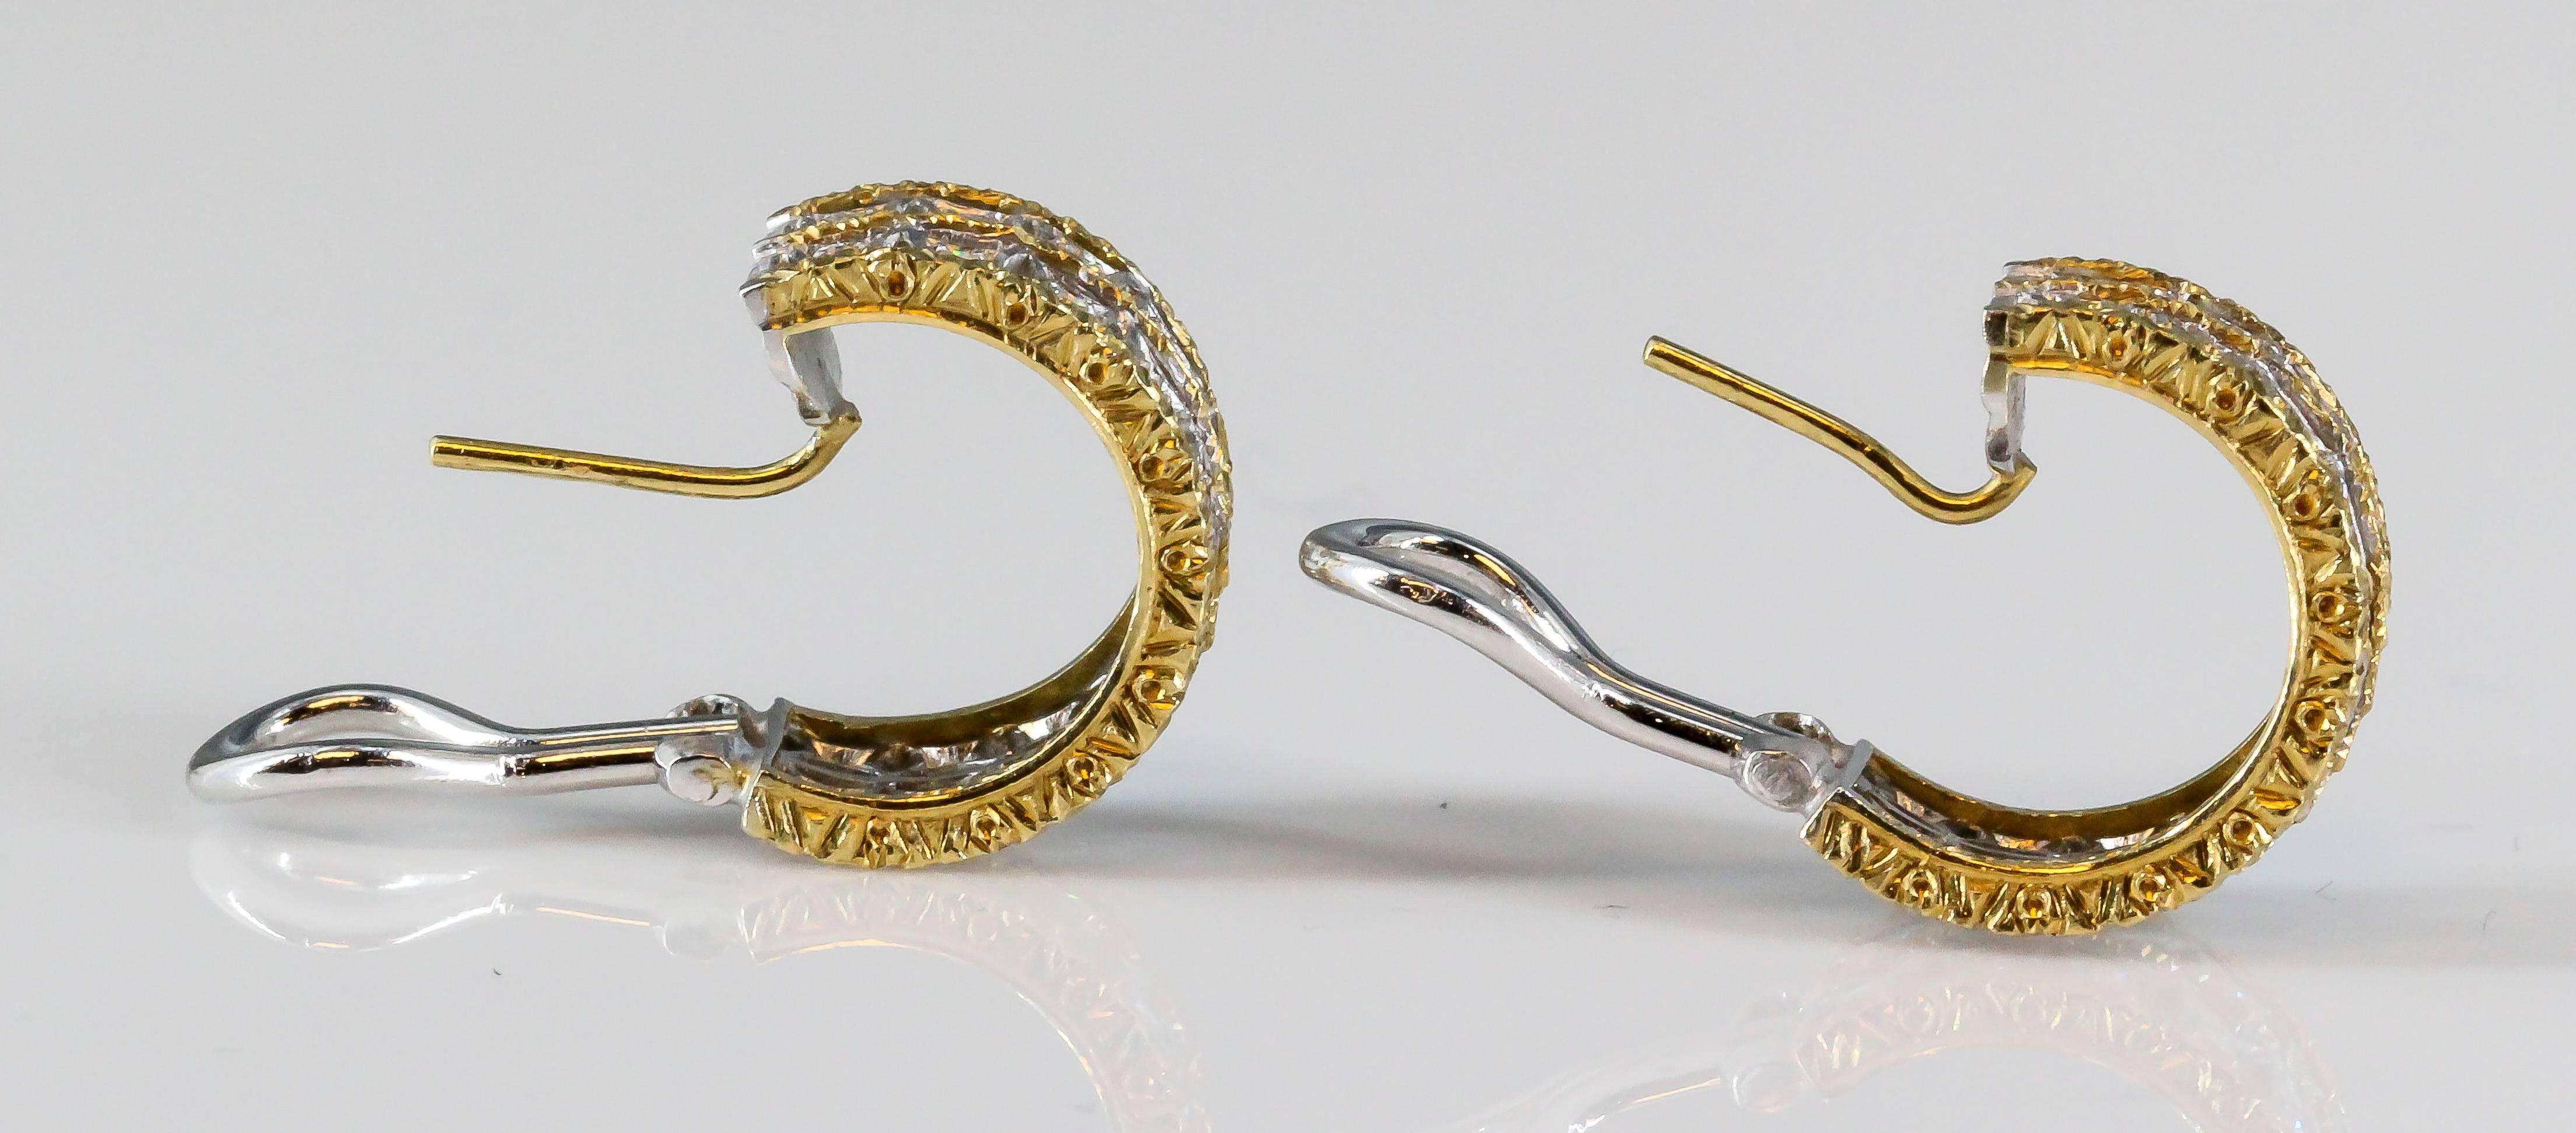 Gorgeous two row diamond and 18K white and yellow gold ear clips by Mario Buccellati. They feature two rows of high grade round brilliant cut diamonds. Beautiful intricate workmanship customary to Buccellati. Easy to wear and very